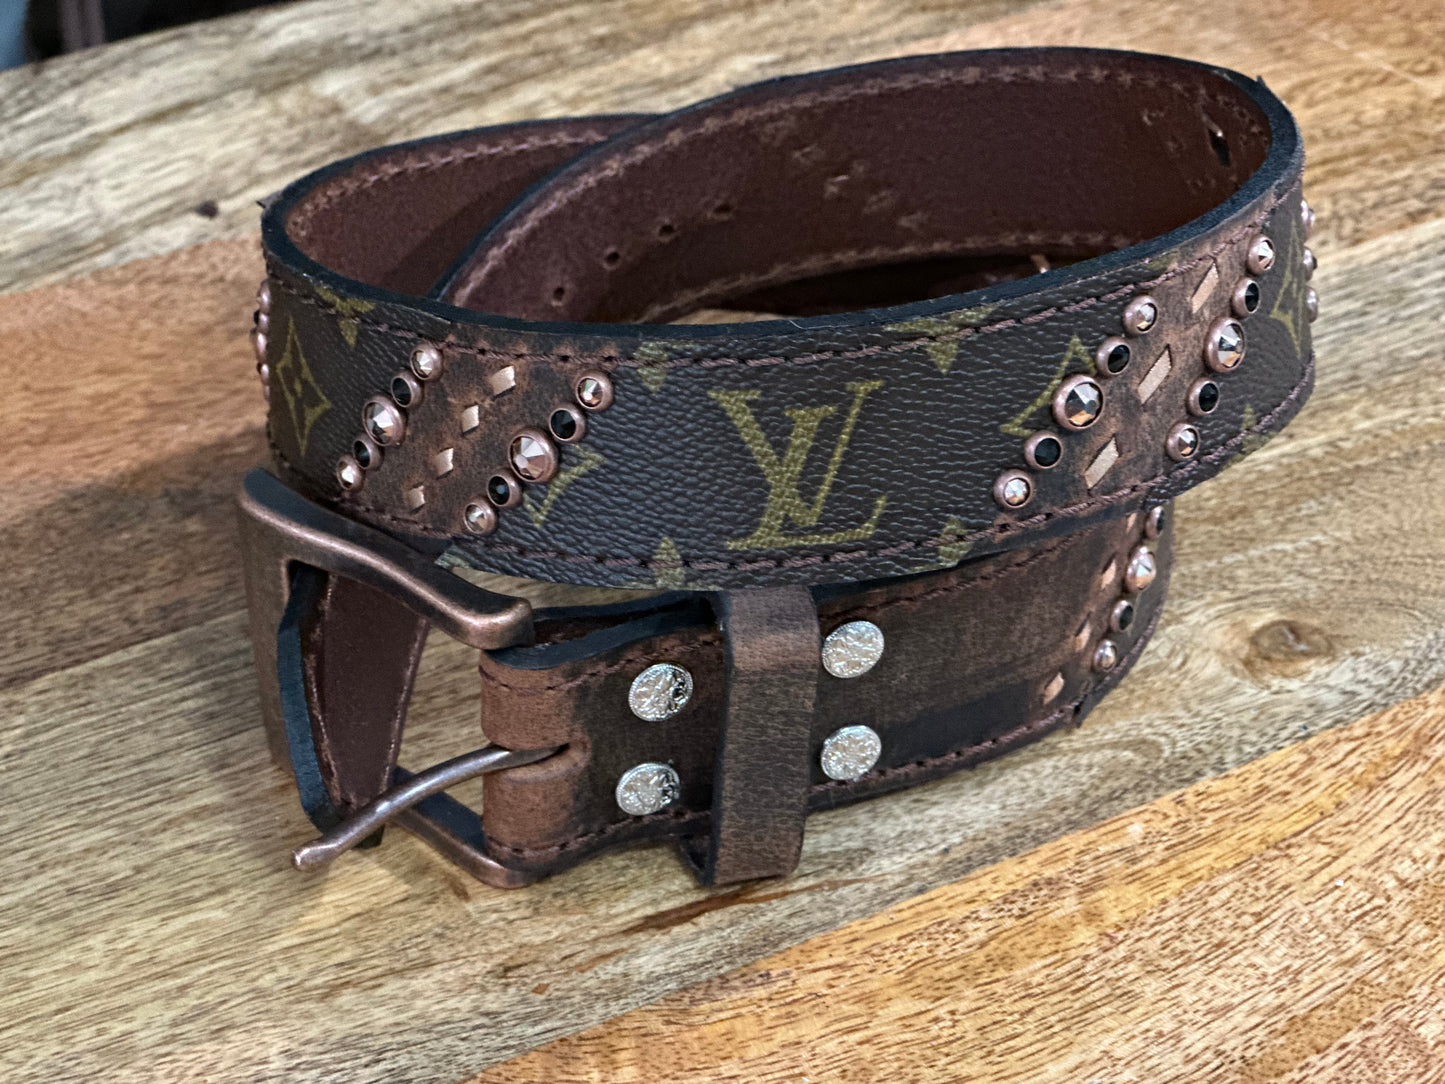 Lv belt with Copper, Rose gold and Jet